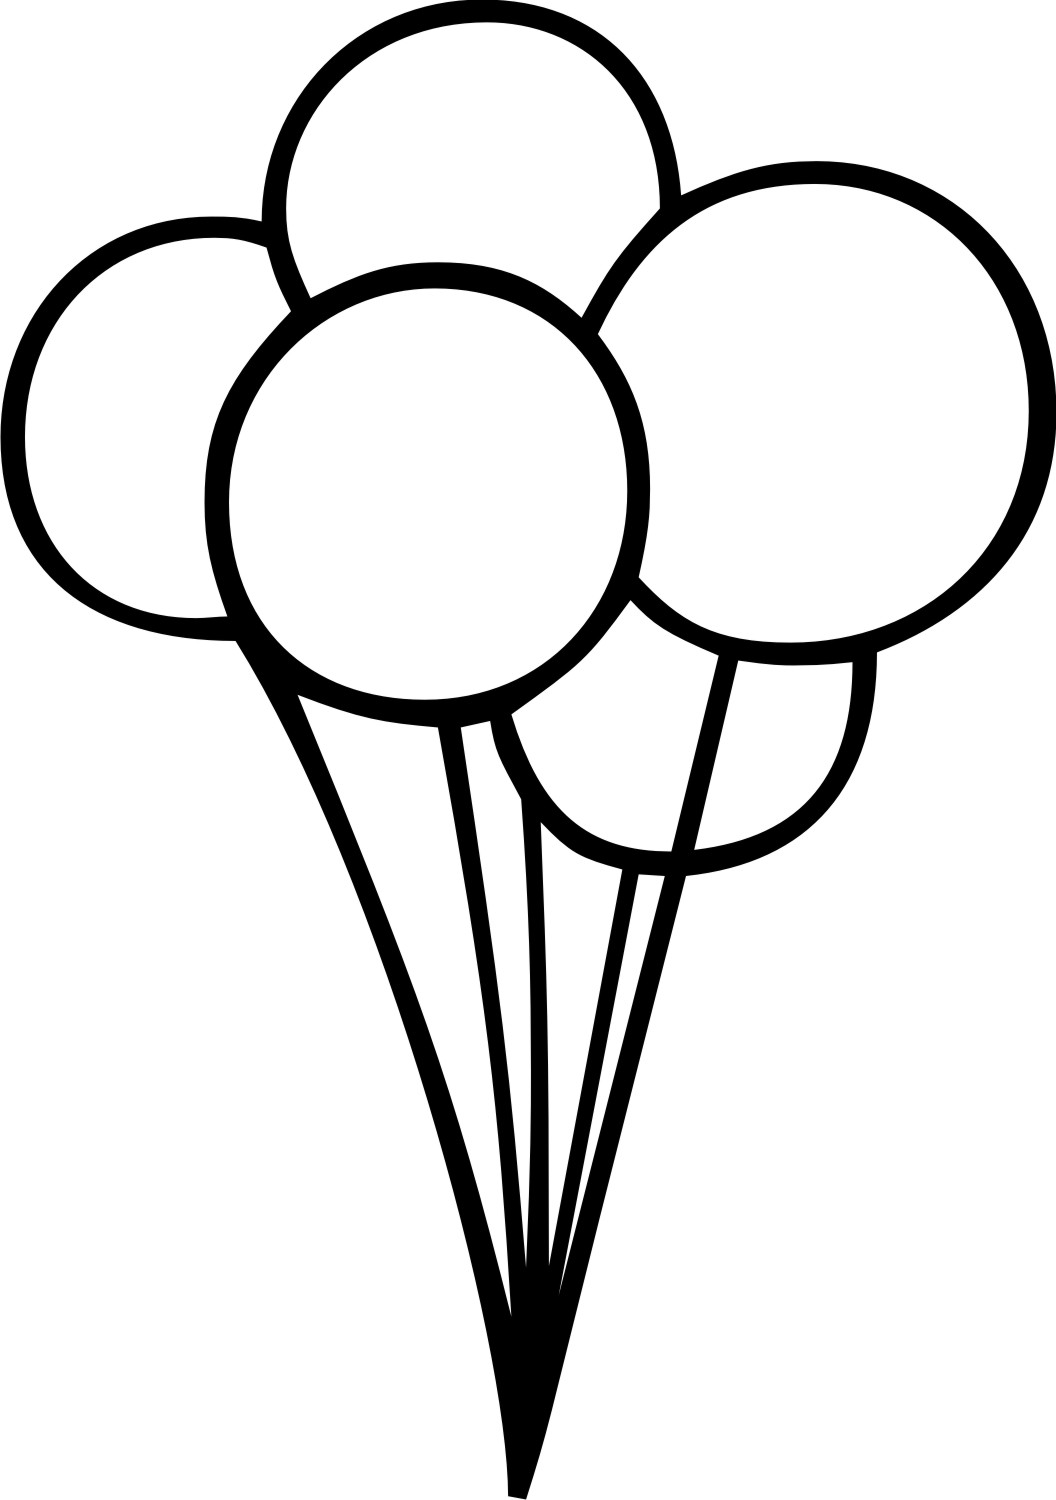 clipart balloons black and white - photo #1